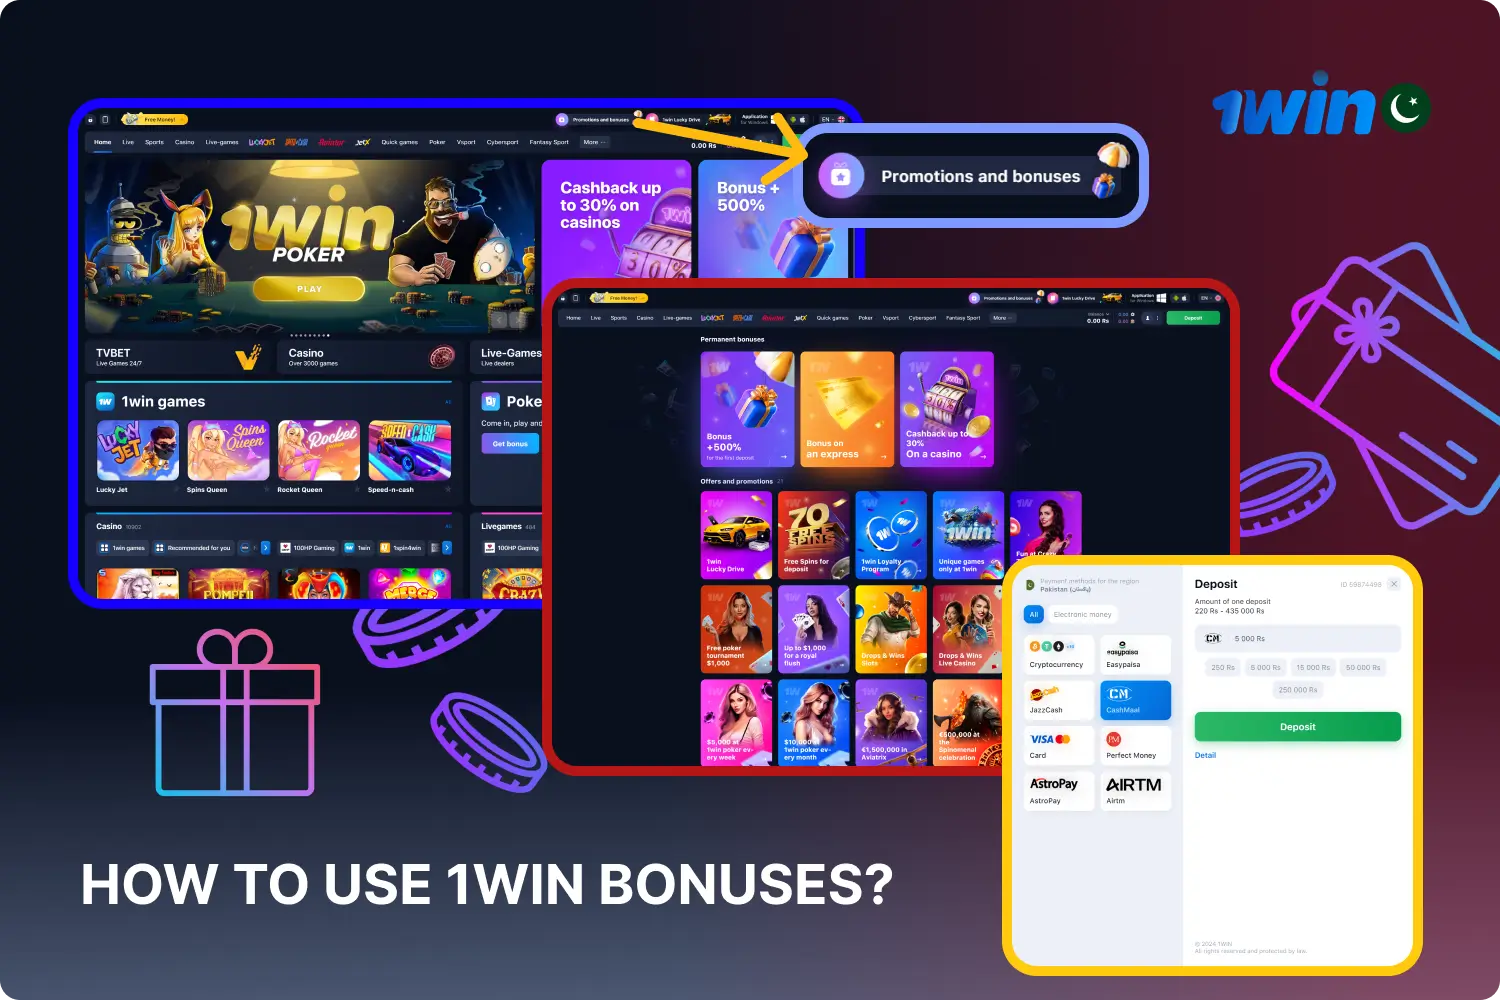 To take benefit of the bonuses for sports betting or casino games offered by the 1win platform, users in Pakistan need to follow a few simple steps